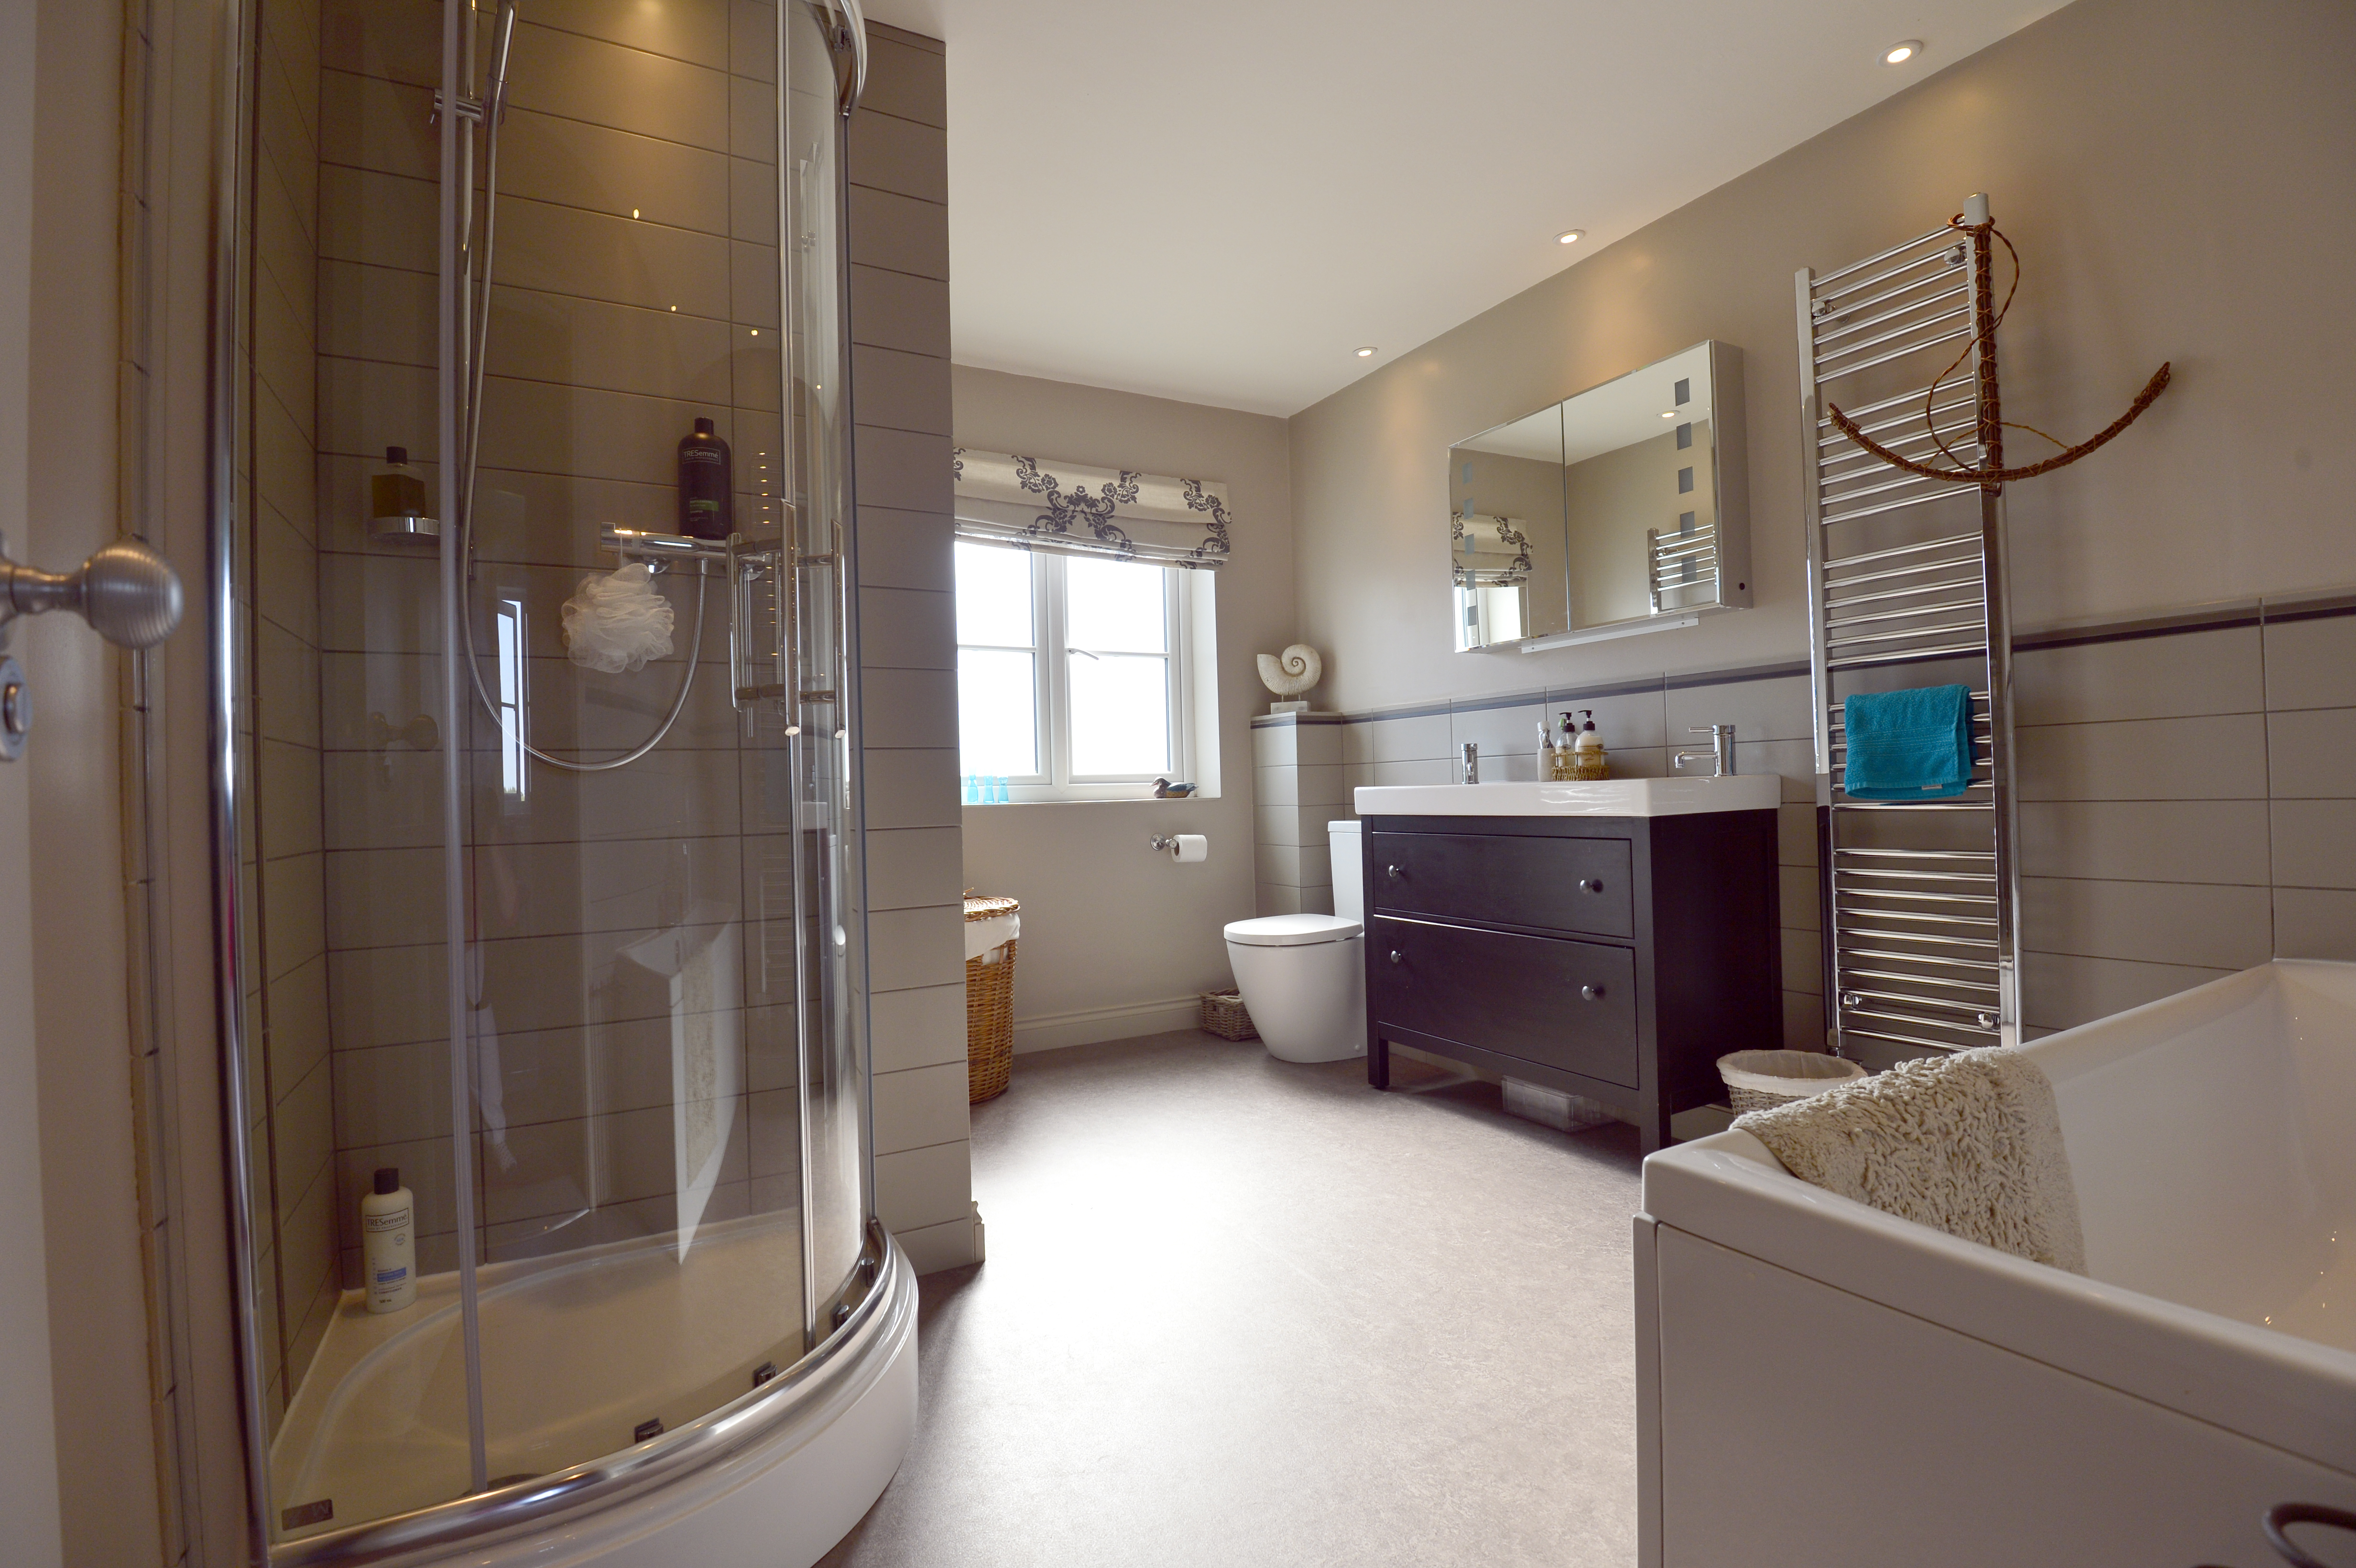 Bathroom Interior Design in Cublington, Buckinghamshire by Sarah Maidment Interiors, Brighton, Hove and East Sussex